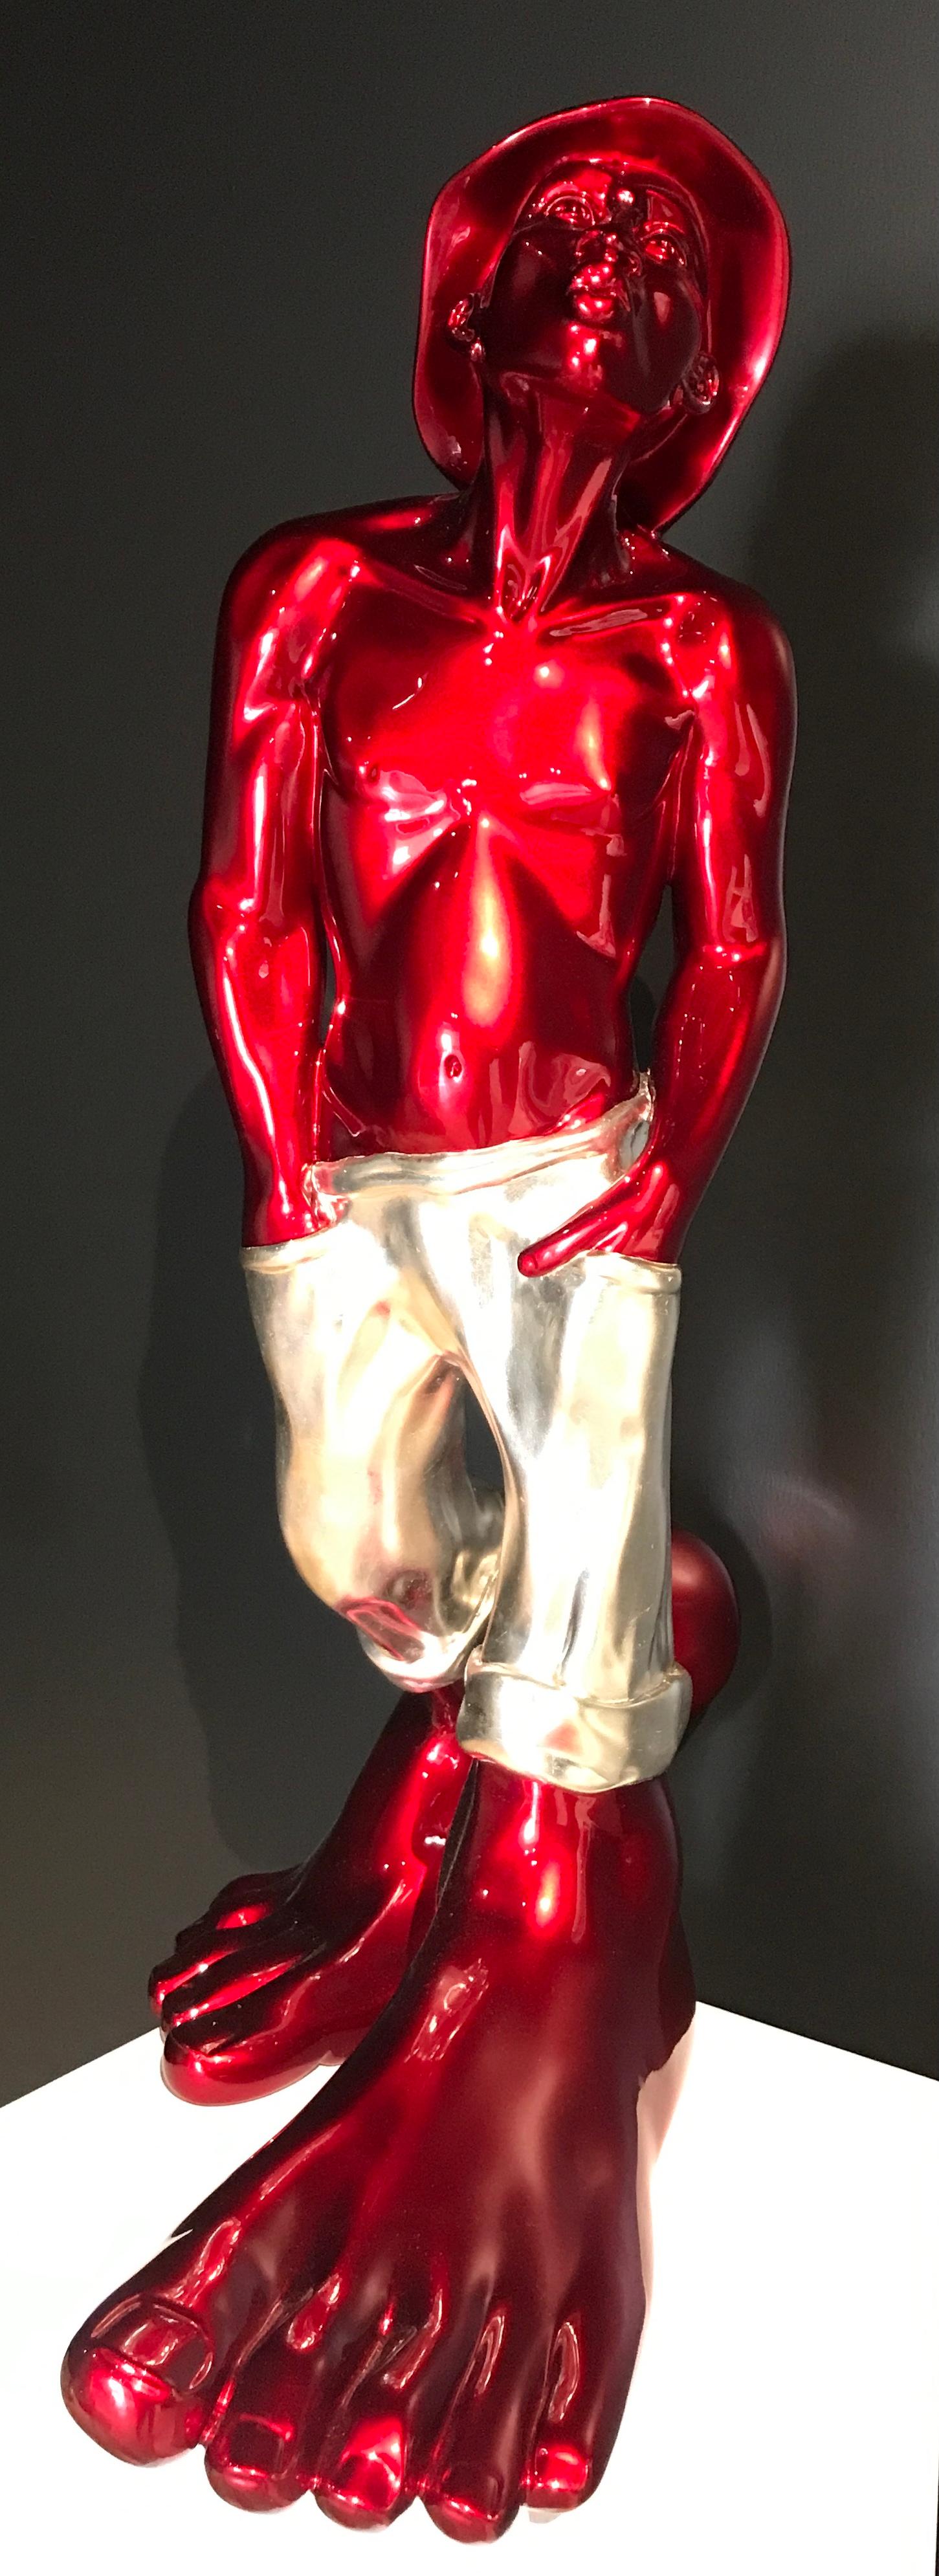 Signed and numbered limited edition number 2 of 8. 

Resin sculpture with Candy Apple red metallic paint and silver leaf with a warm silvery gold finish. 

Idan Zareski was born in Haifa, Israel, and he has French nationality. Life would take him